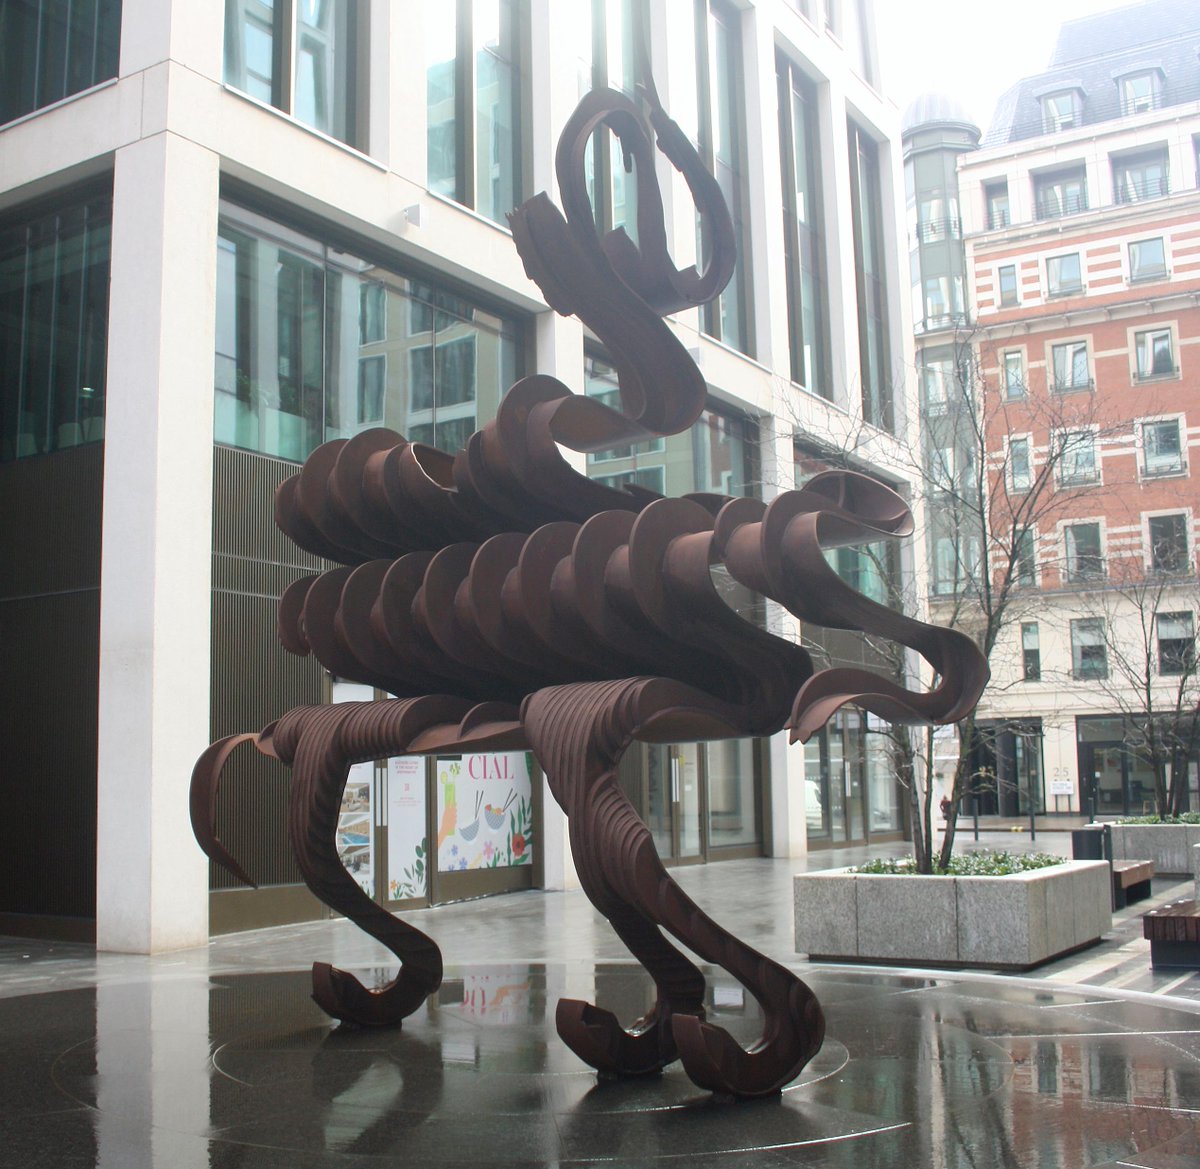 Angel Hope Place, Metal sculpture, Power over others is Weakness disguised as Strength. 2023 by Nick Hornby. Photos: 03.03.2023. #London #metal #sculpture #NickHornby